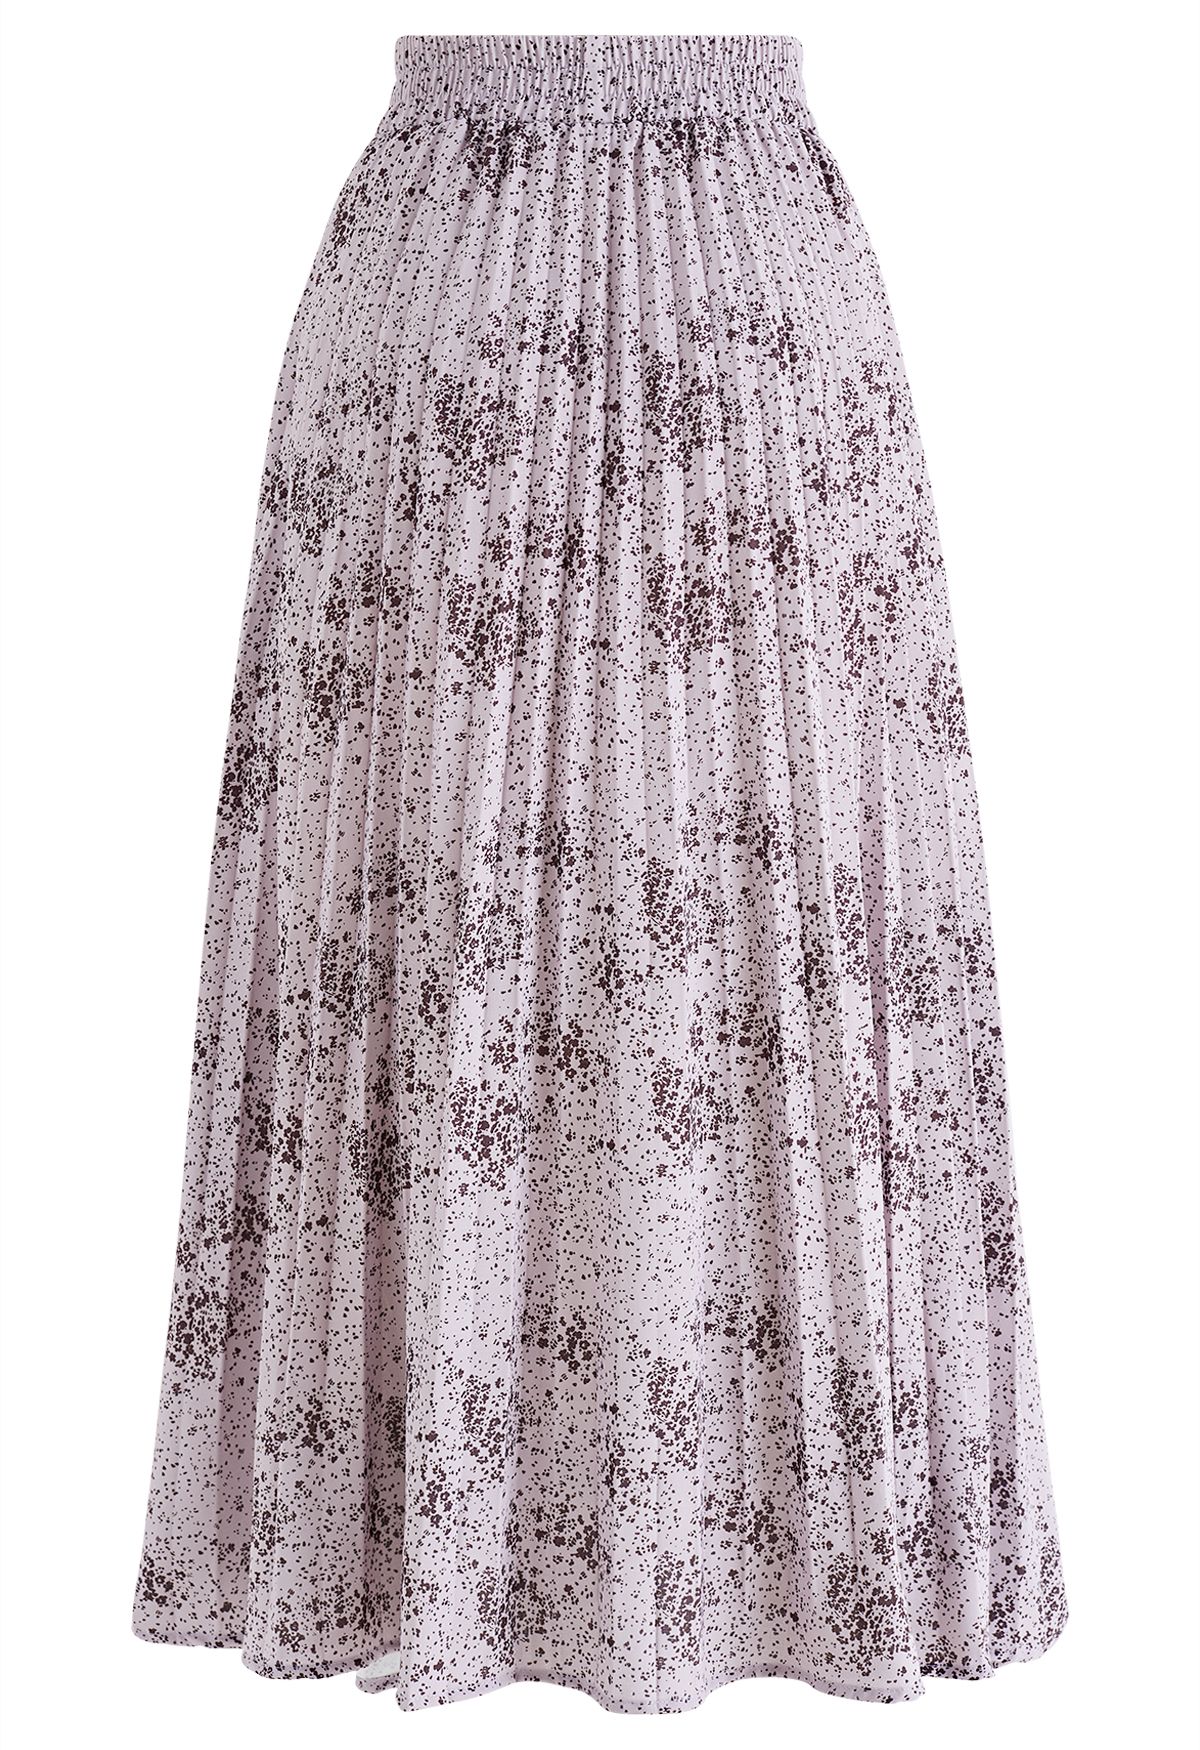 Floret and Spot Print Pleated Midi Skirt in Lilac